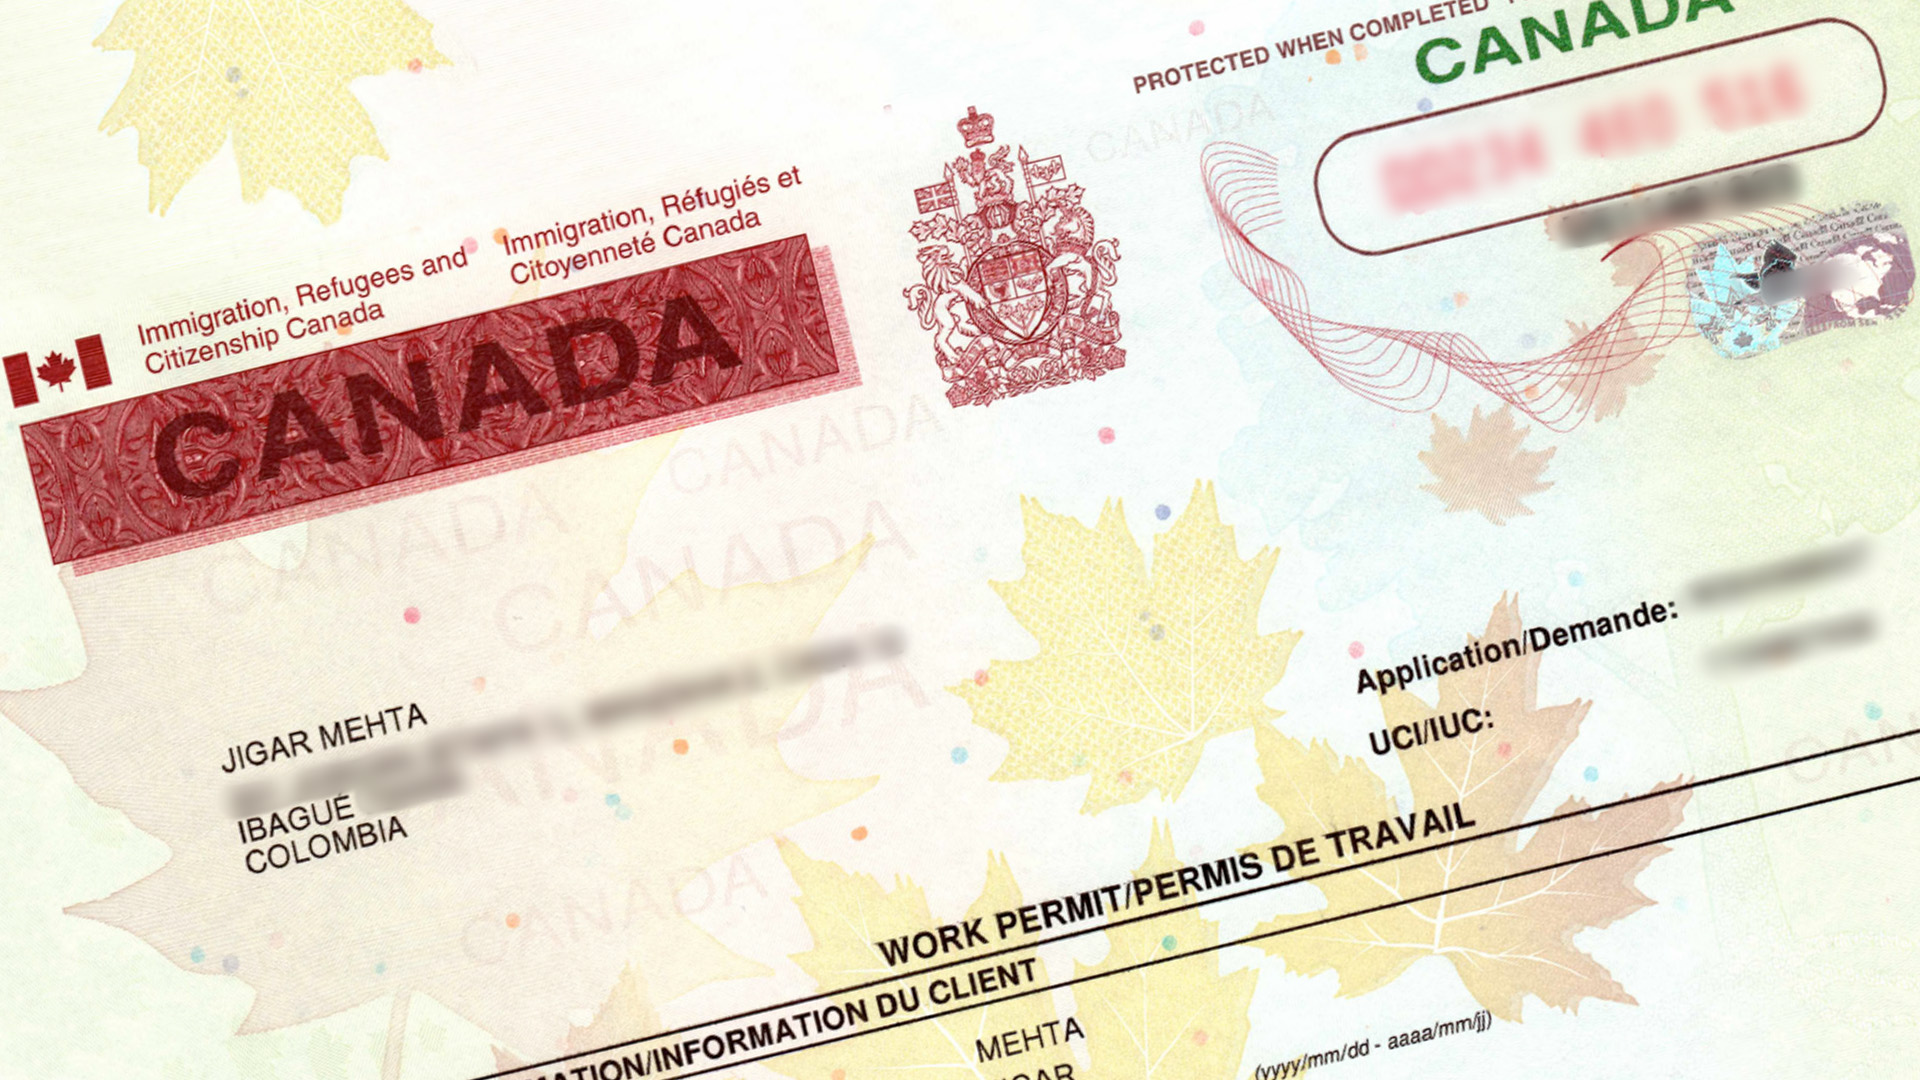 Canada Family Sponsorship now Includes Open Work Permits for Outland Applicants